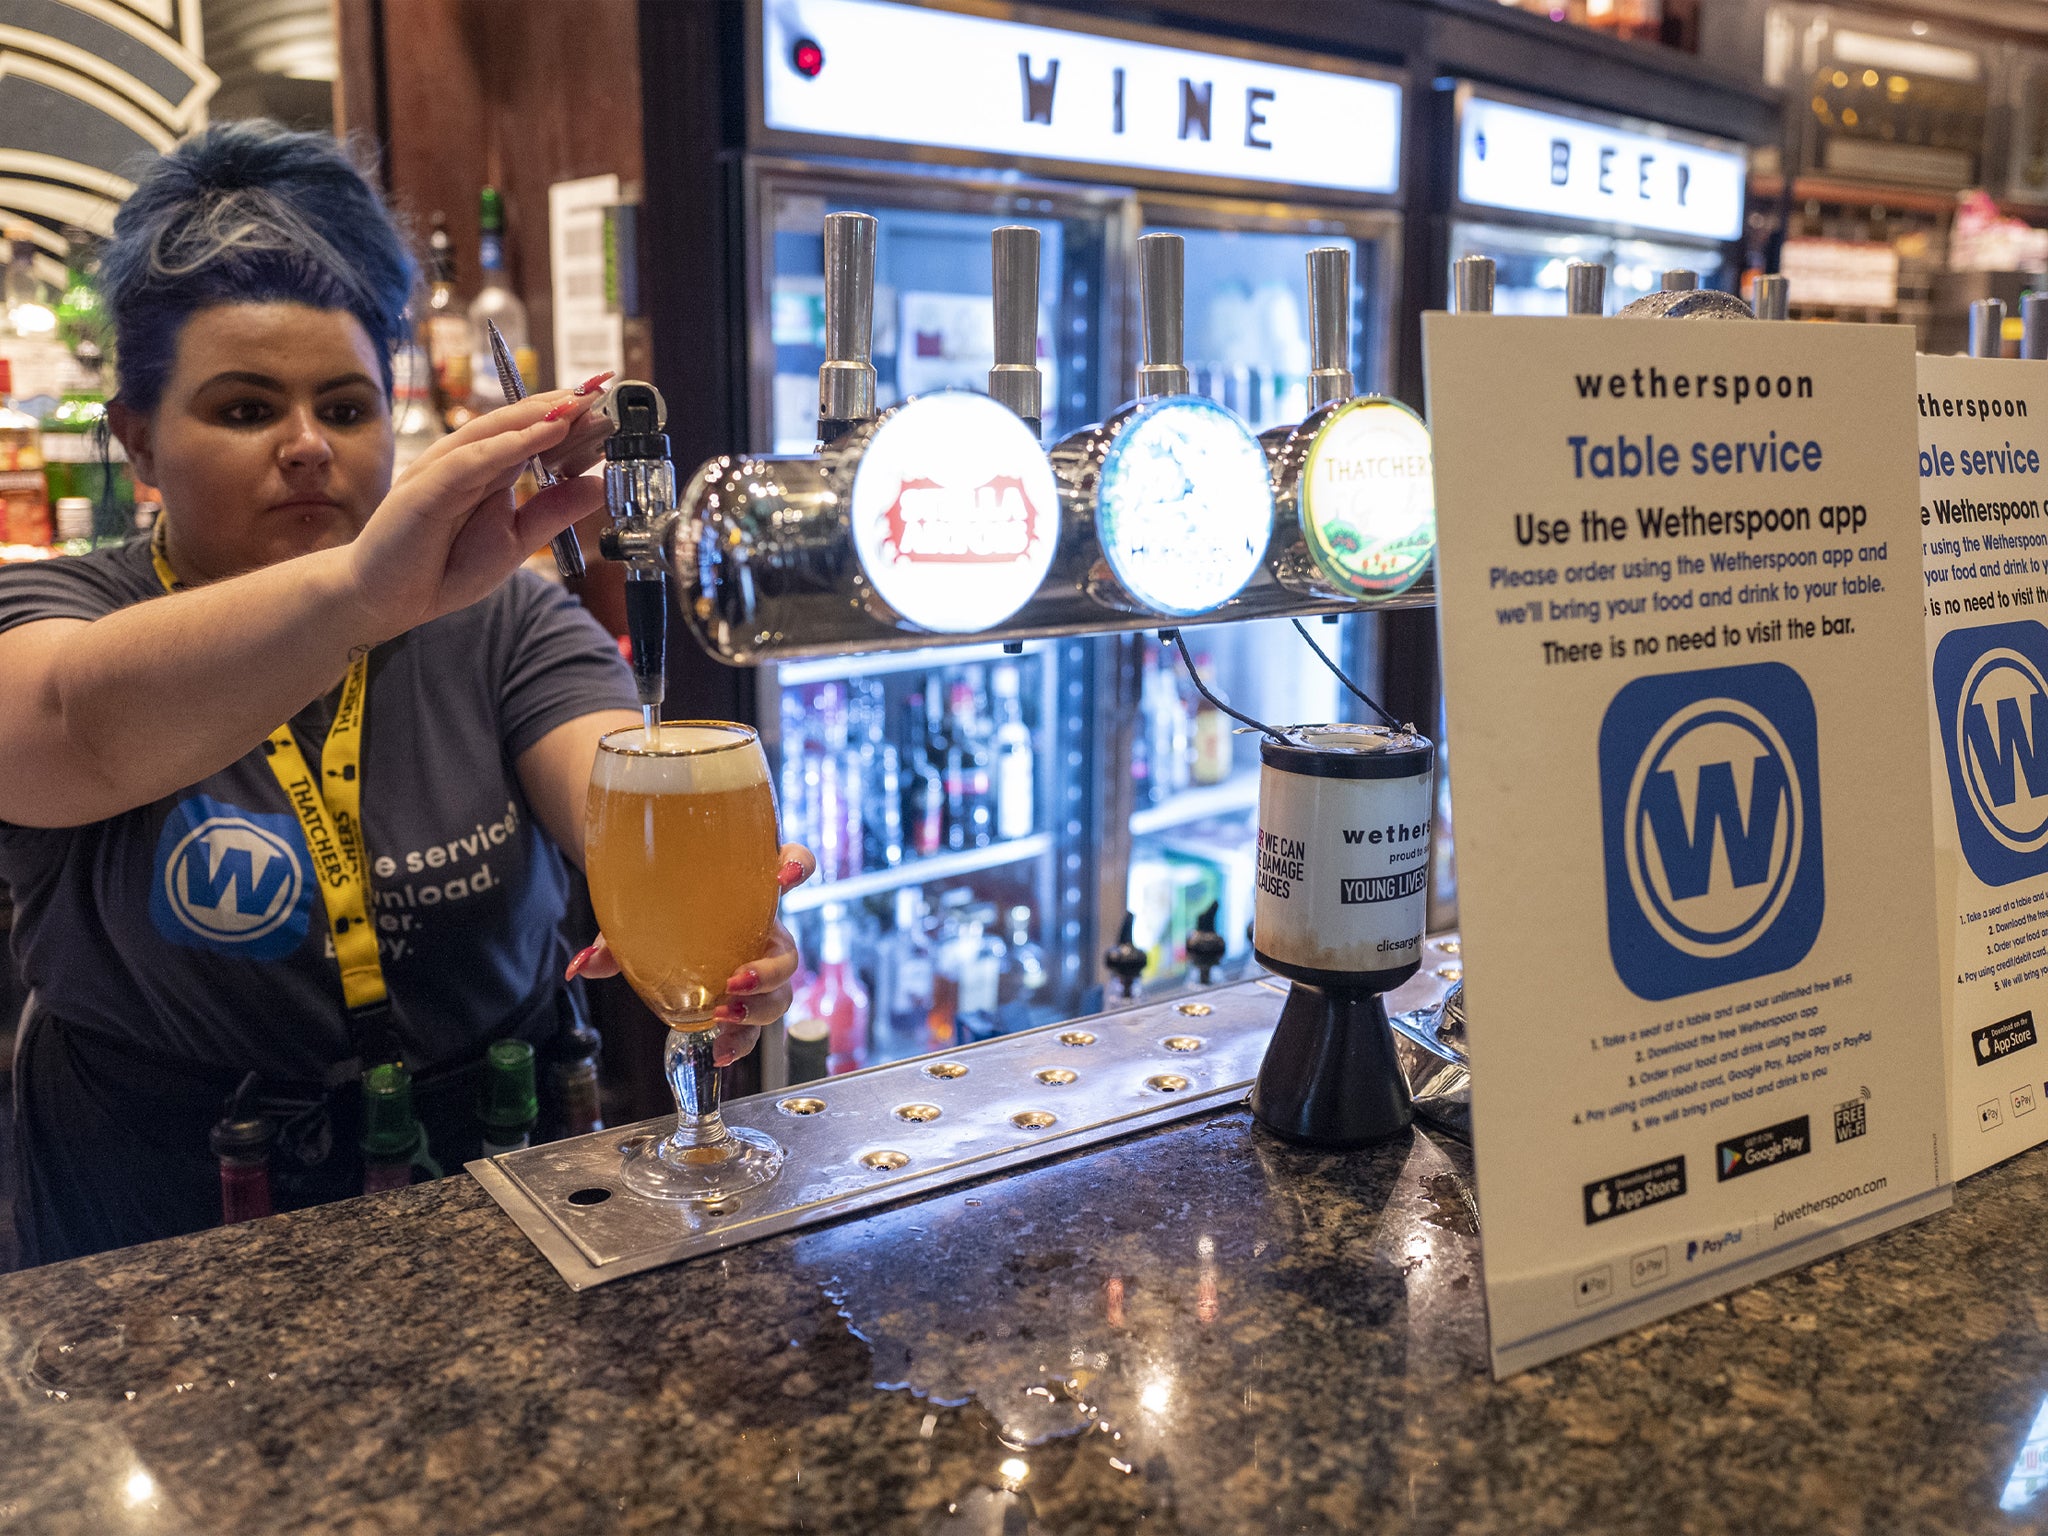 Regal Moon JD Wetherspoons pub on July 04, 2020 in Rochdale, England. The UK Government announced yesterday that pubs, restaurants and bars will have a 10pm curfew in an effort to curb coronavirus infection rates